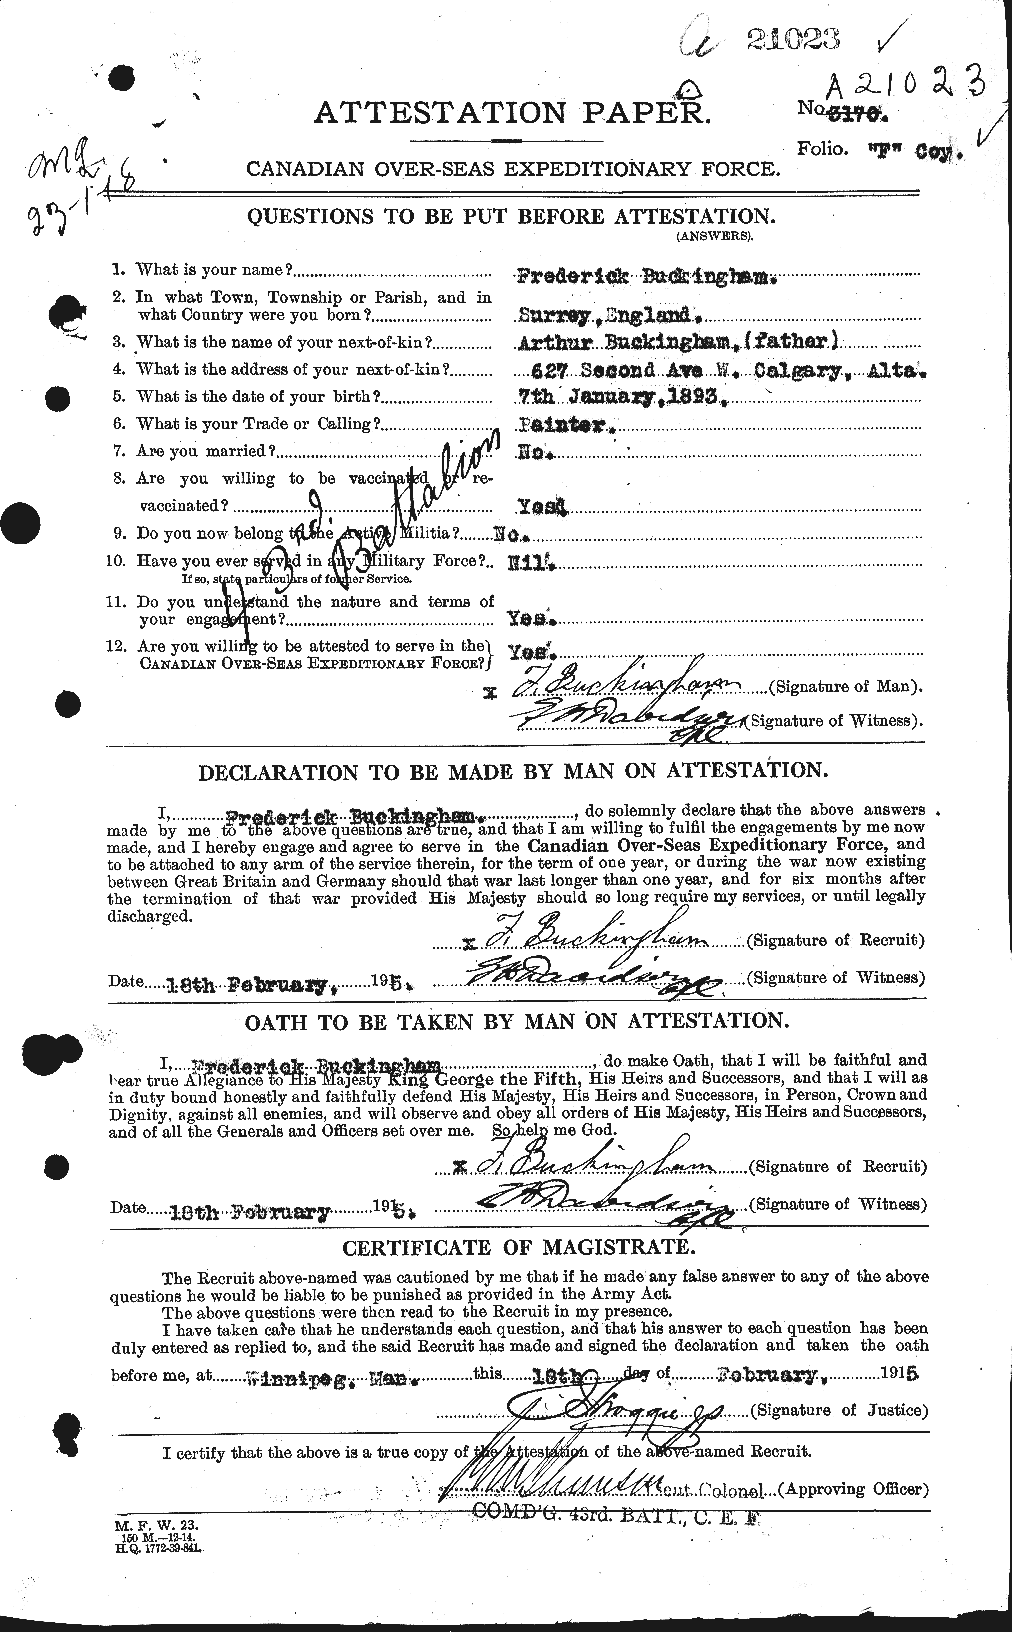 Personnel Records of the First World War - CEF 269436a